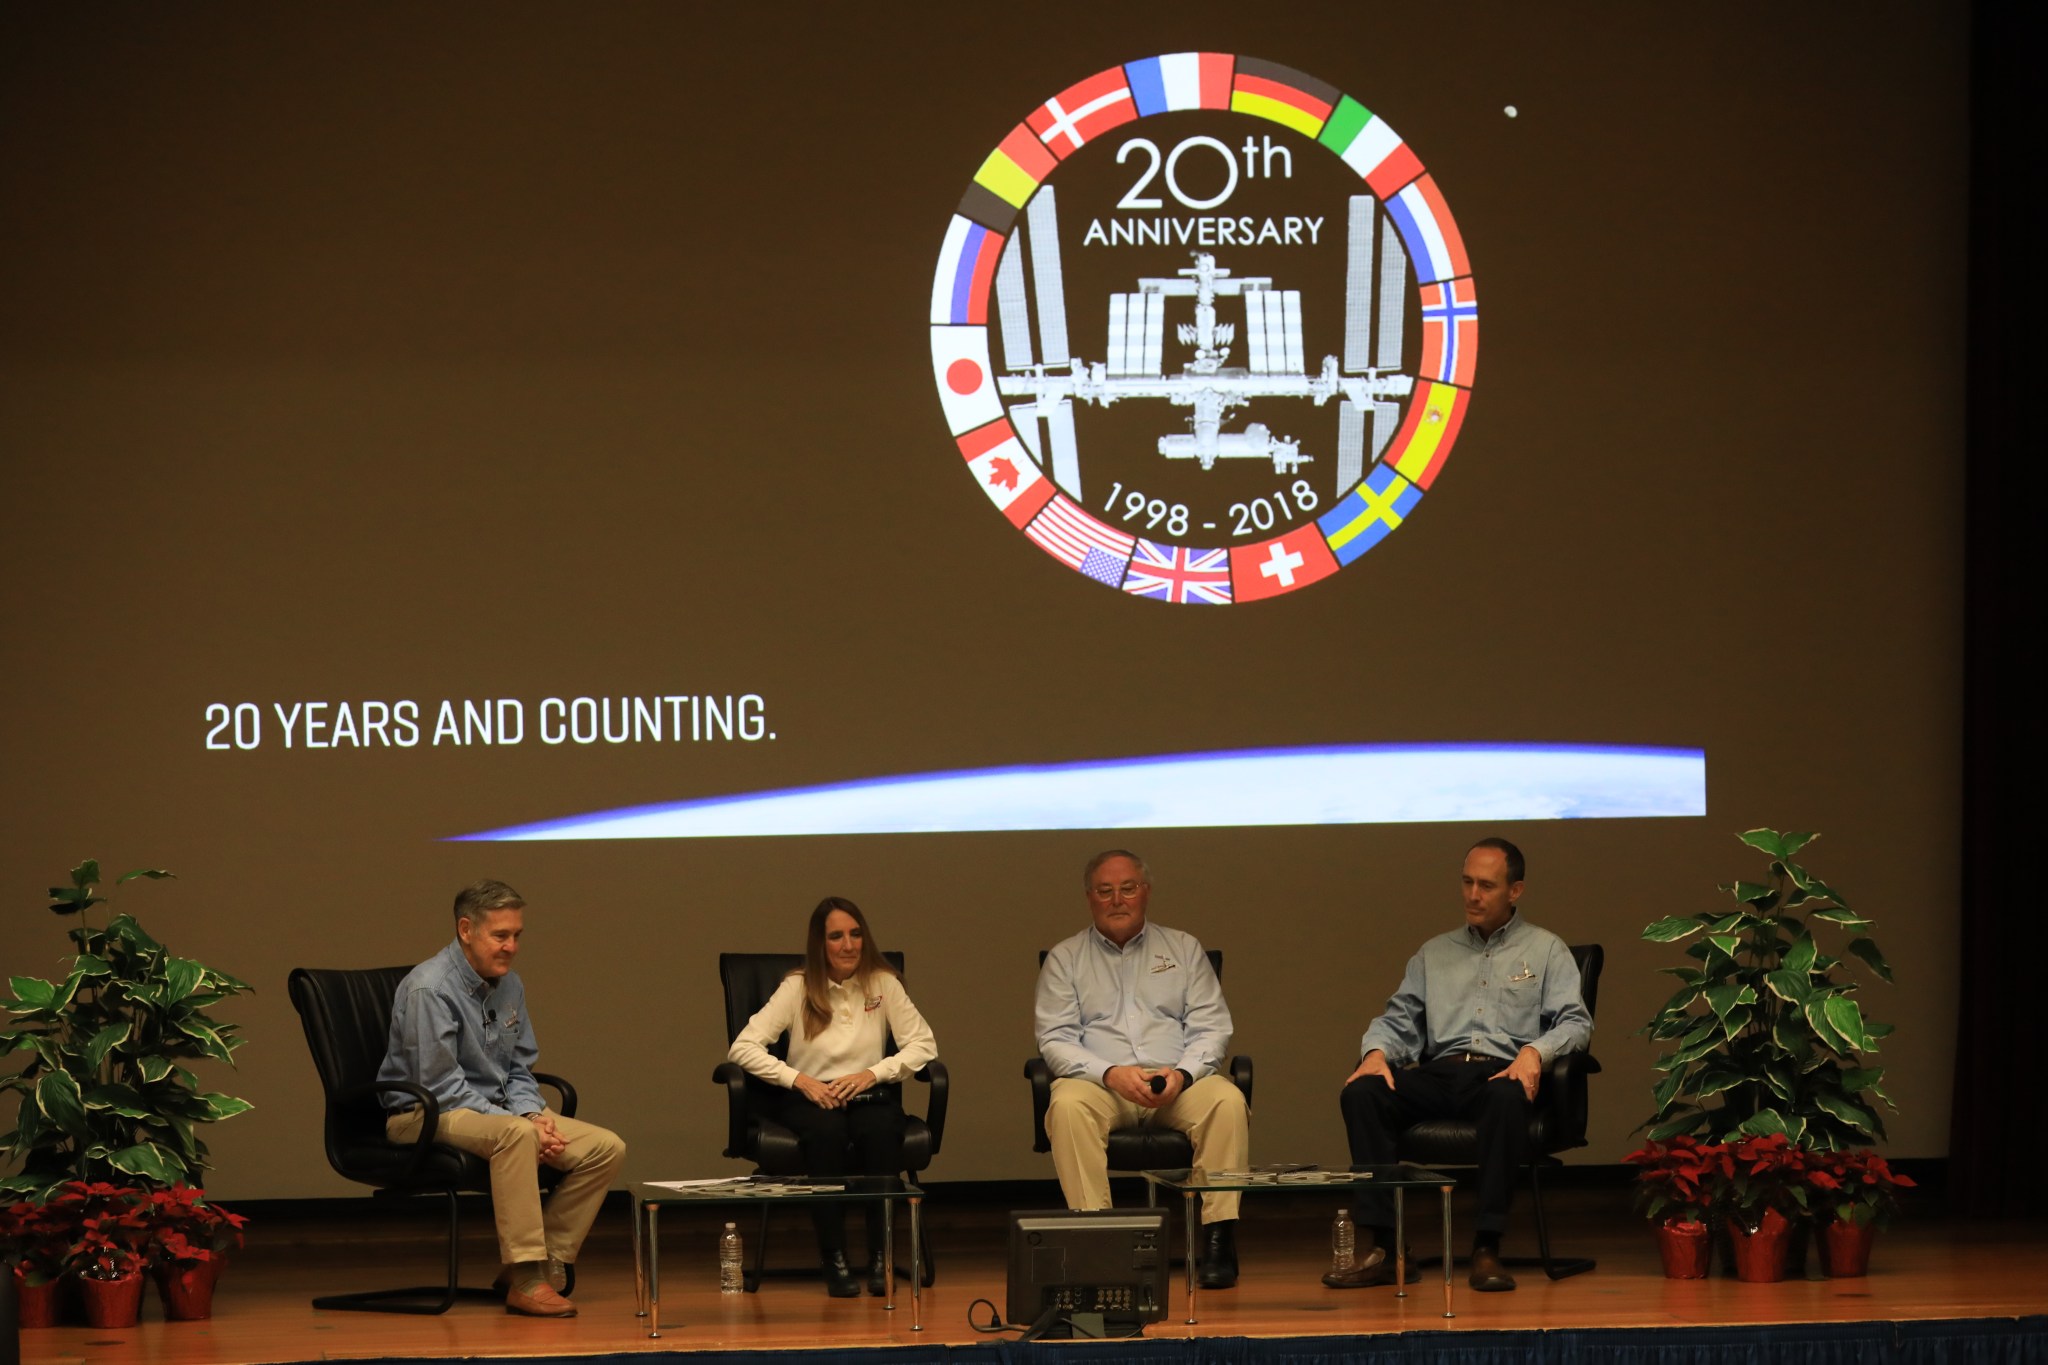 STS-88 crew members held a panel discussion at Kennedy Space Center to celebrate the 20th anniversary of the mission.